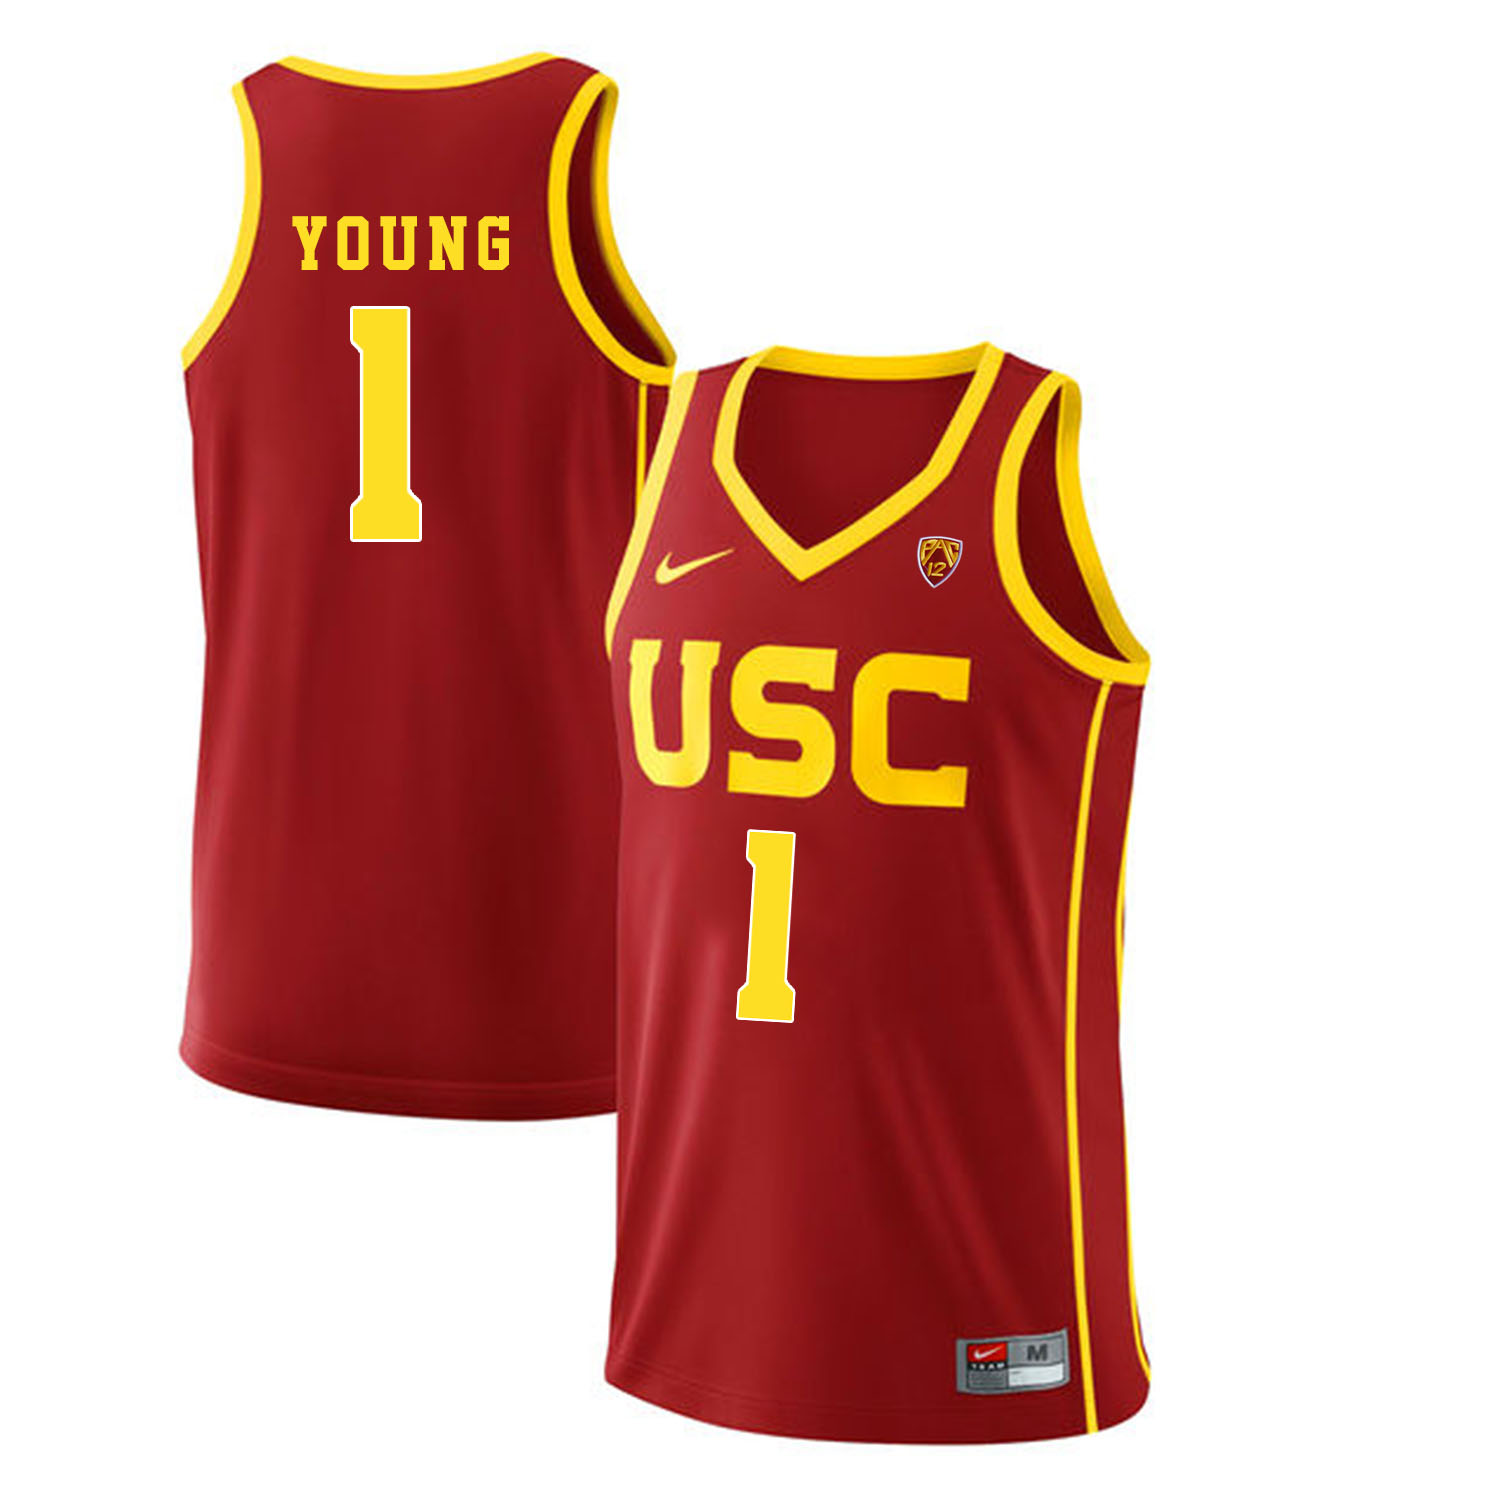 USC Trojans 1 Nick Young Red College Basketball Jersey